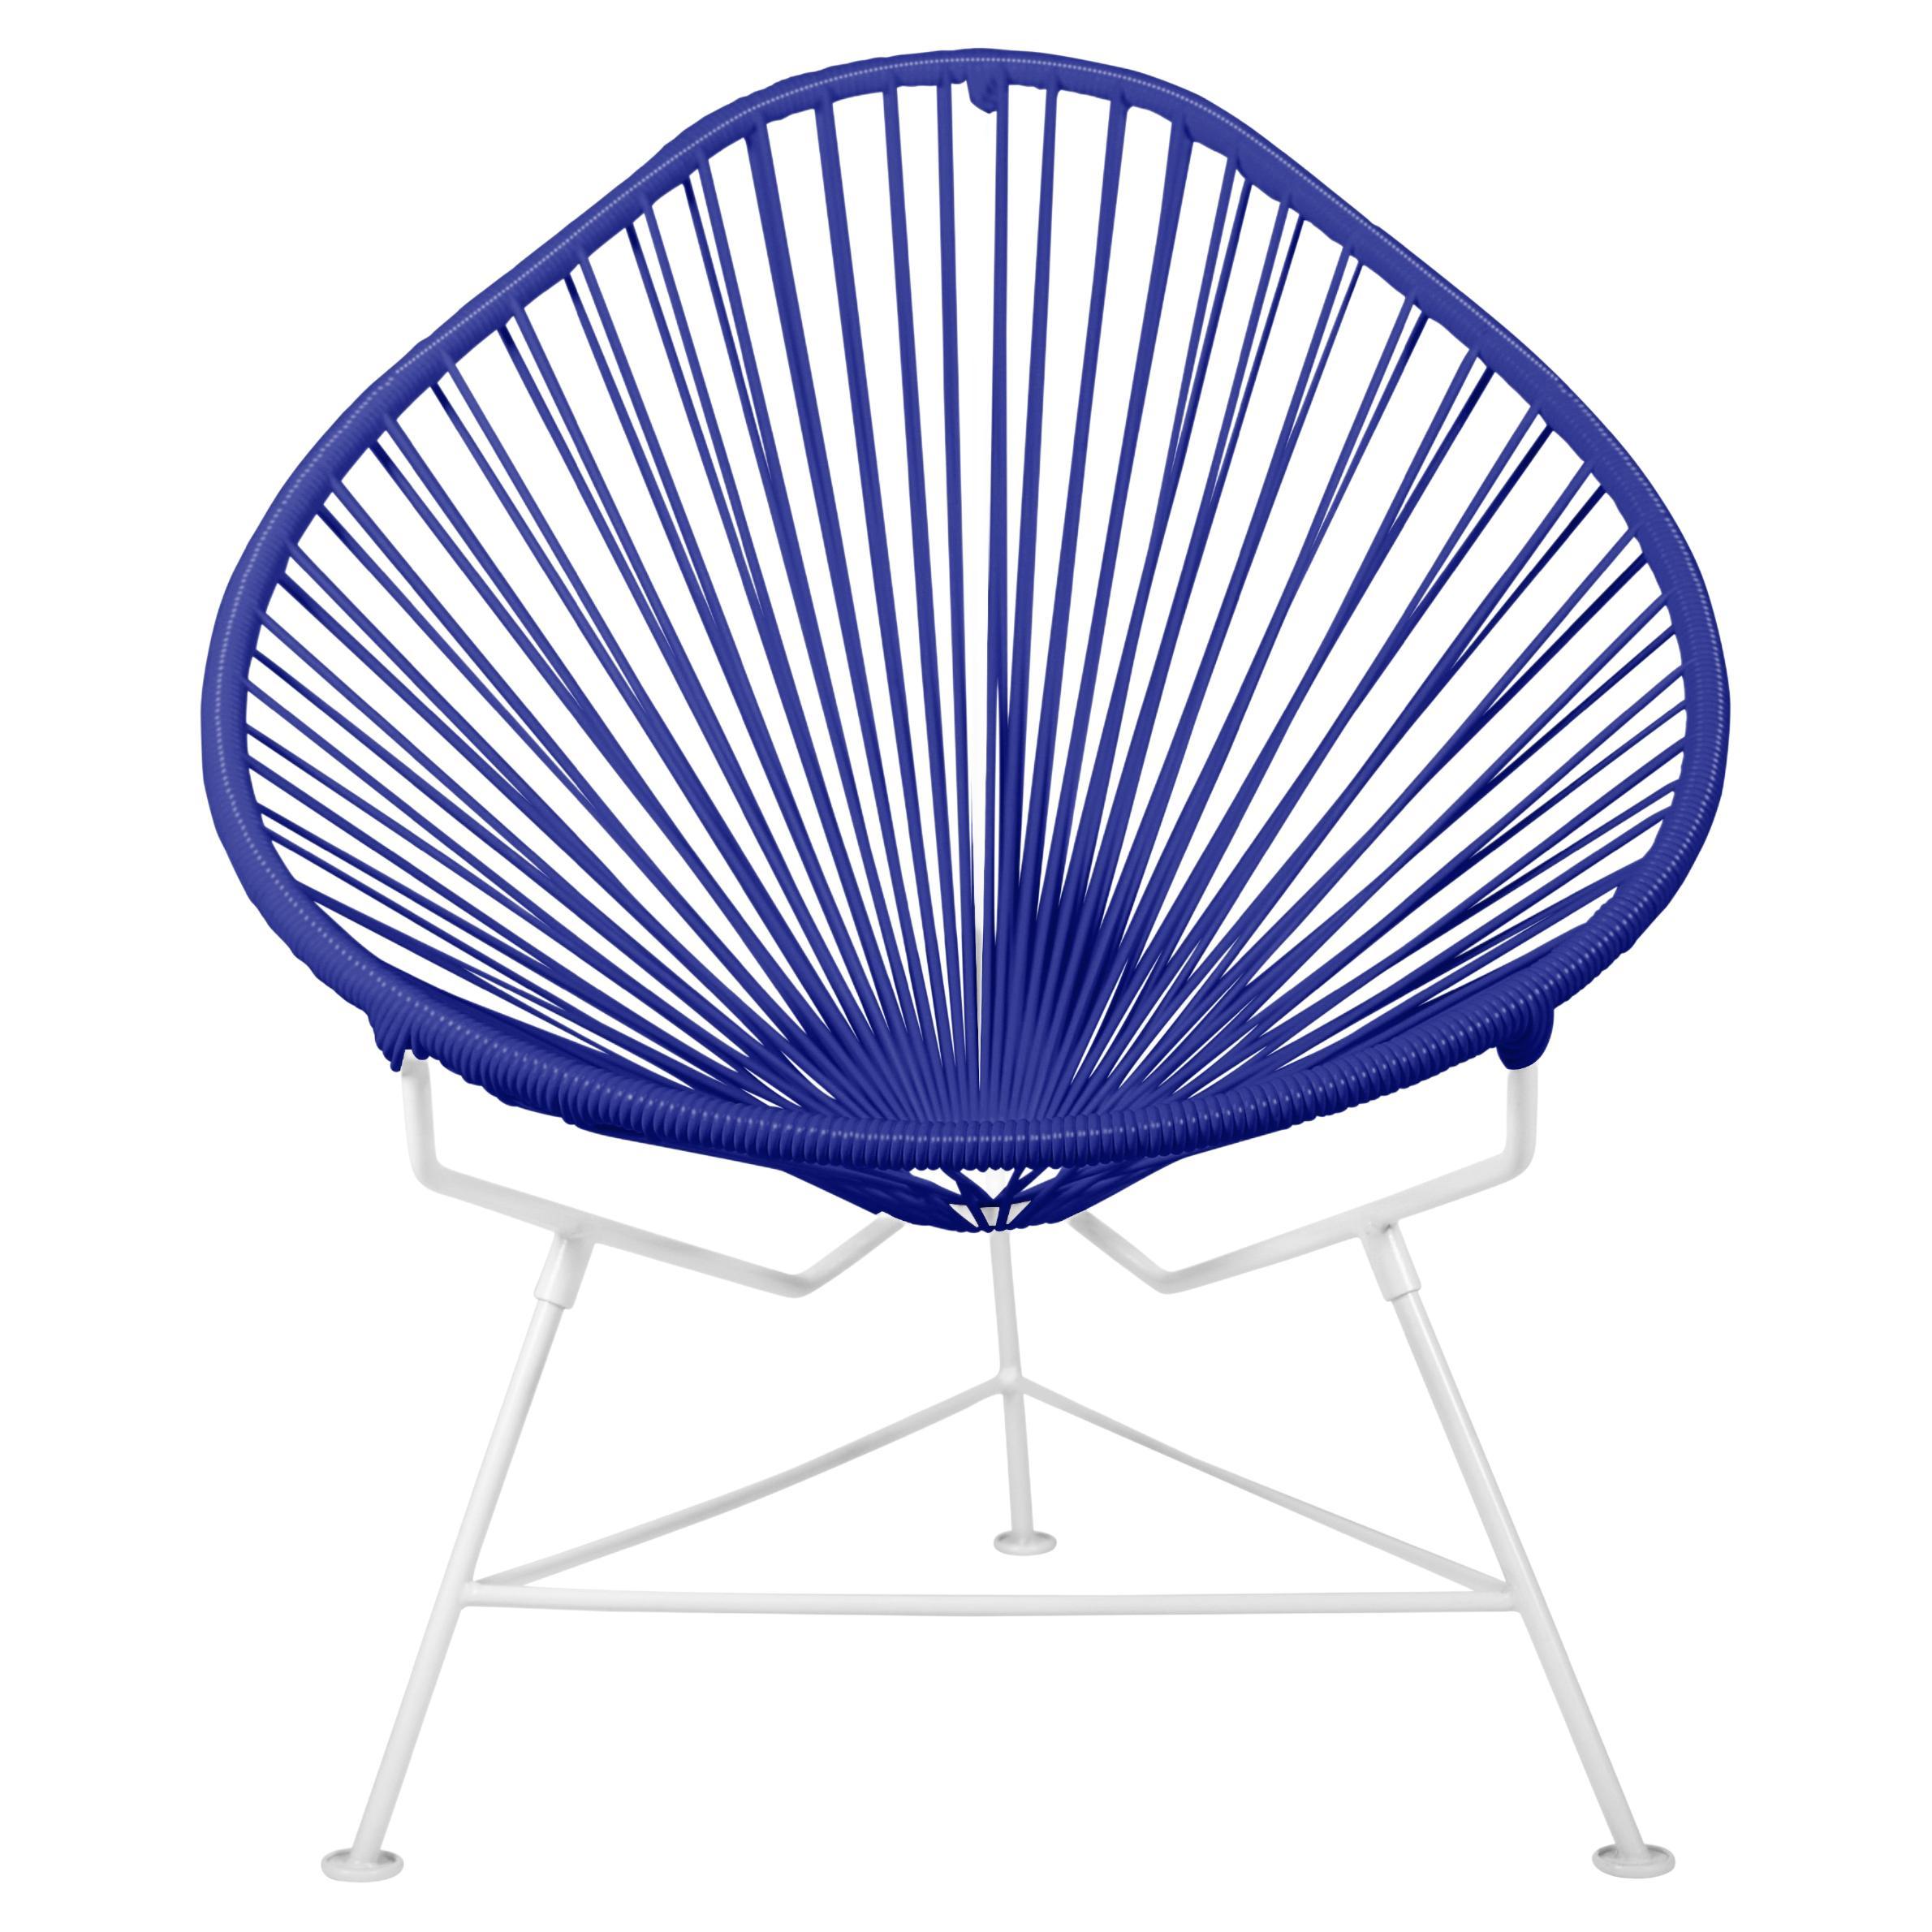 Innit Designs Acapulco Chair Deep Blue Weave on White Frame